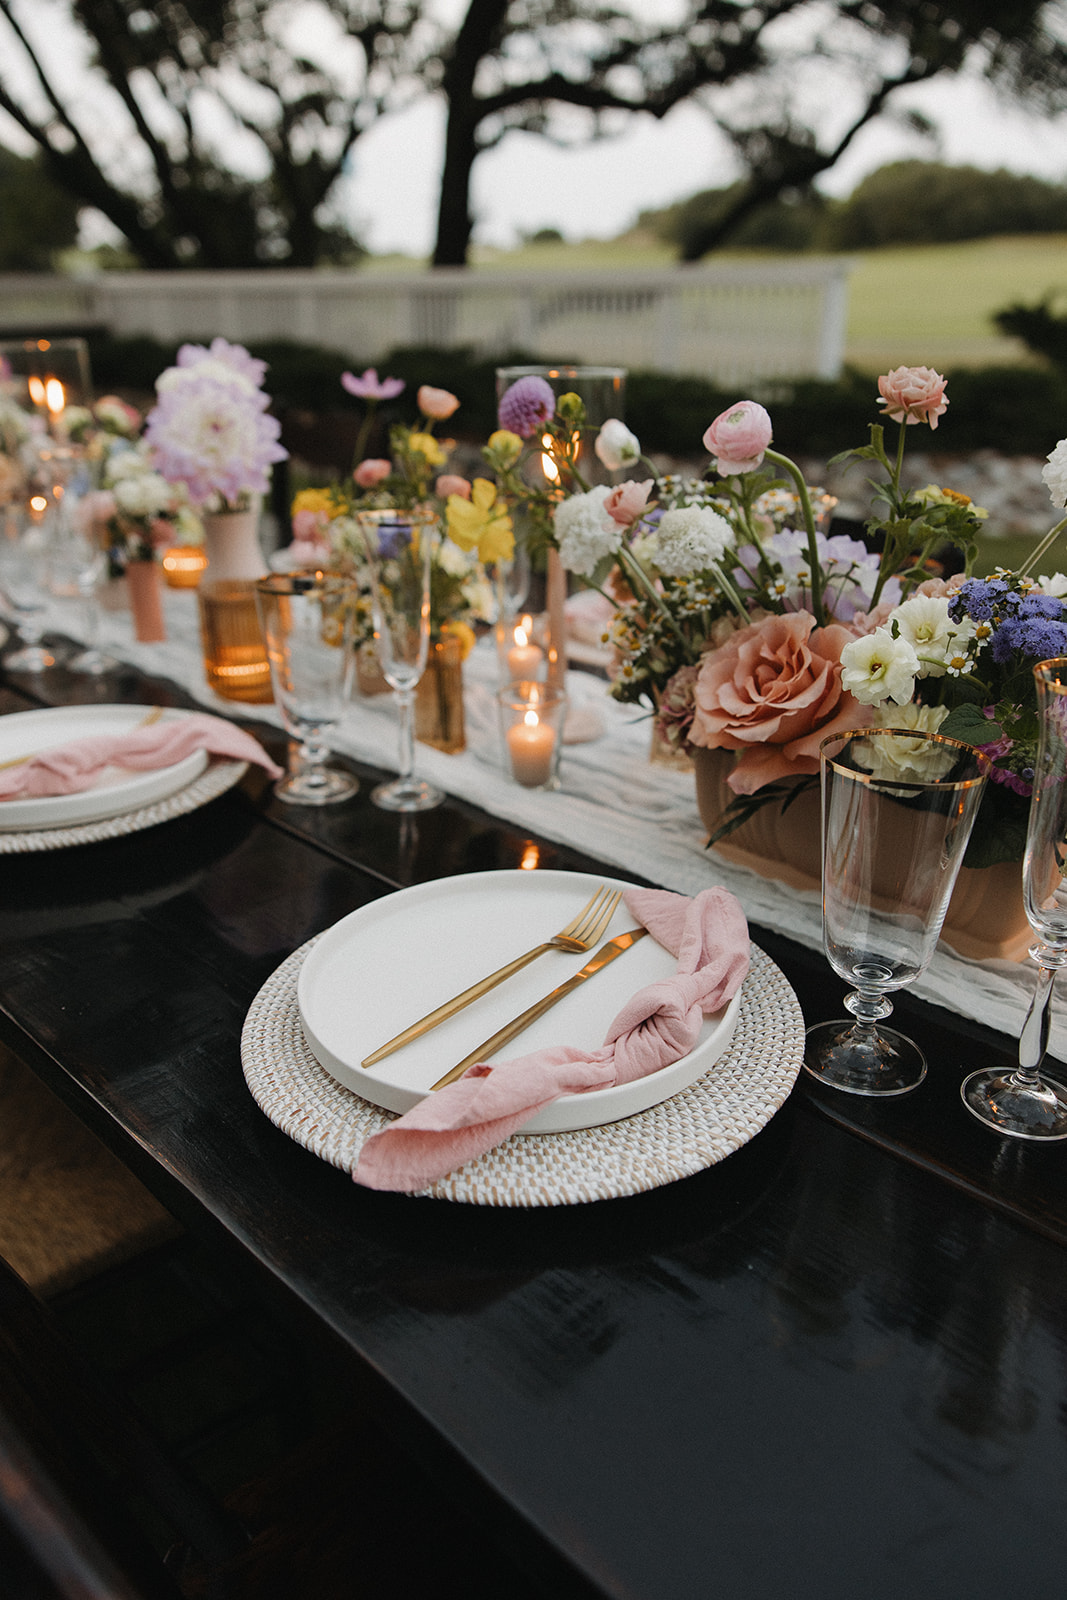 floral decor and table settings at backyard wedding reception